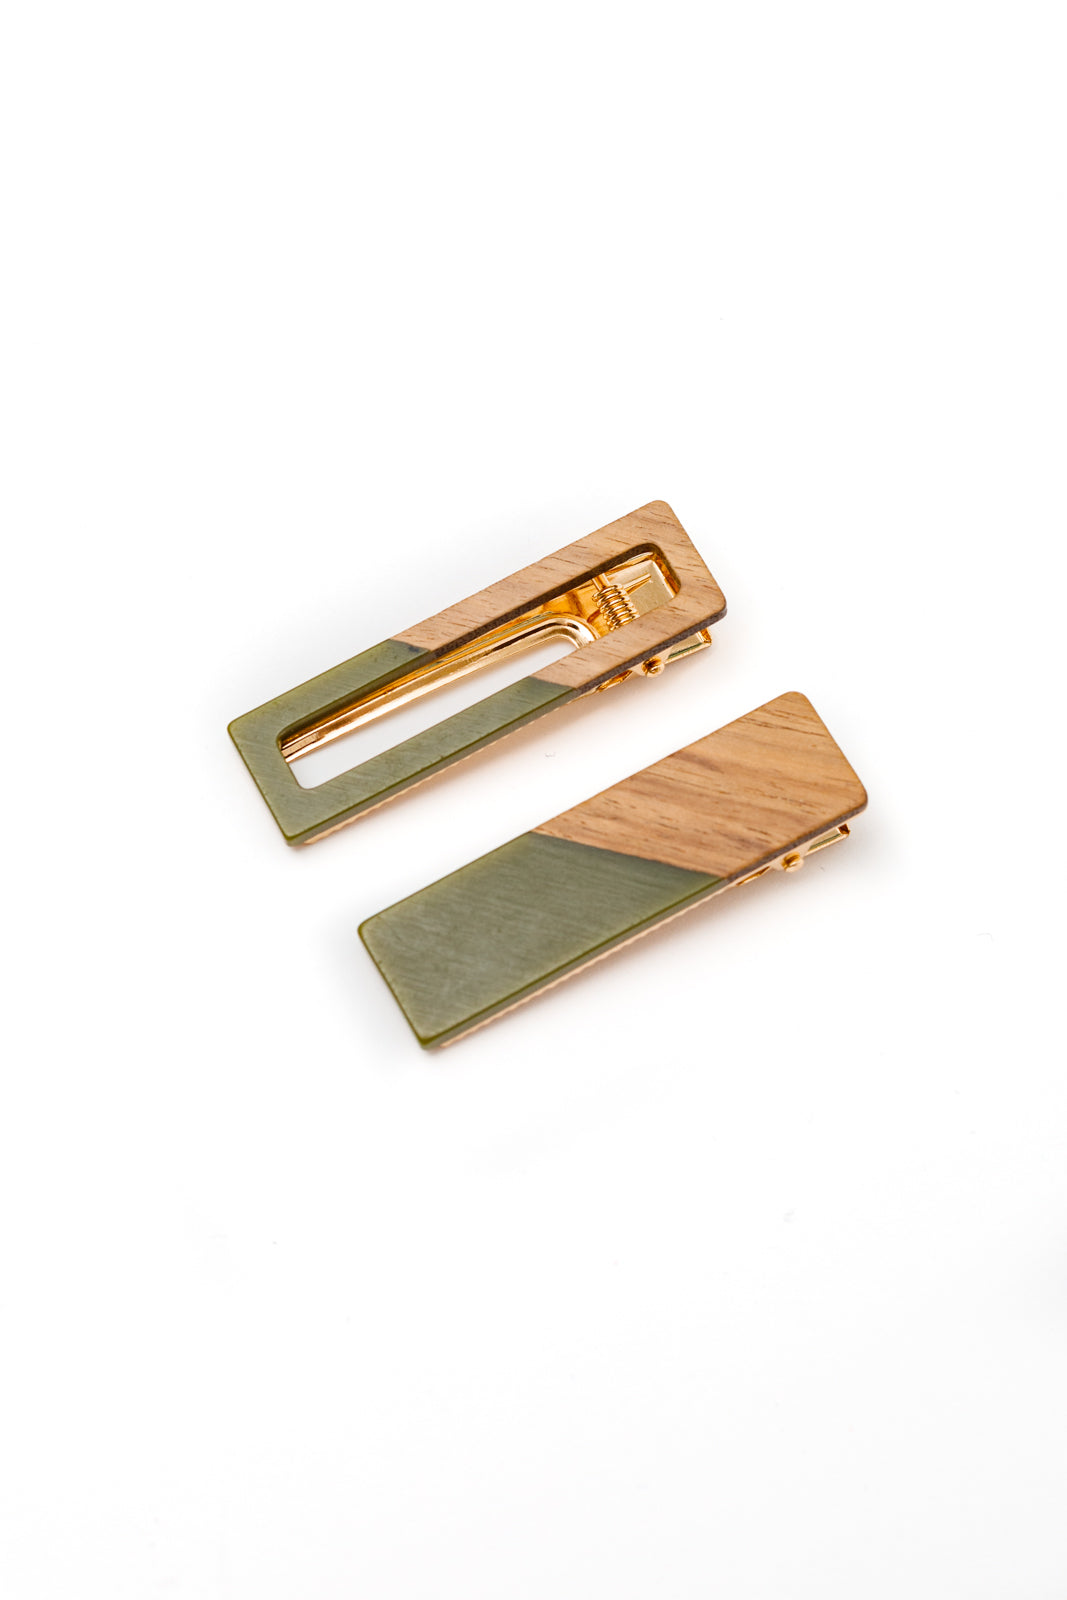 Two Tone Hair Clip Set in Green - Website Exclusive